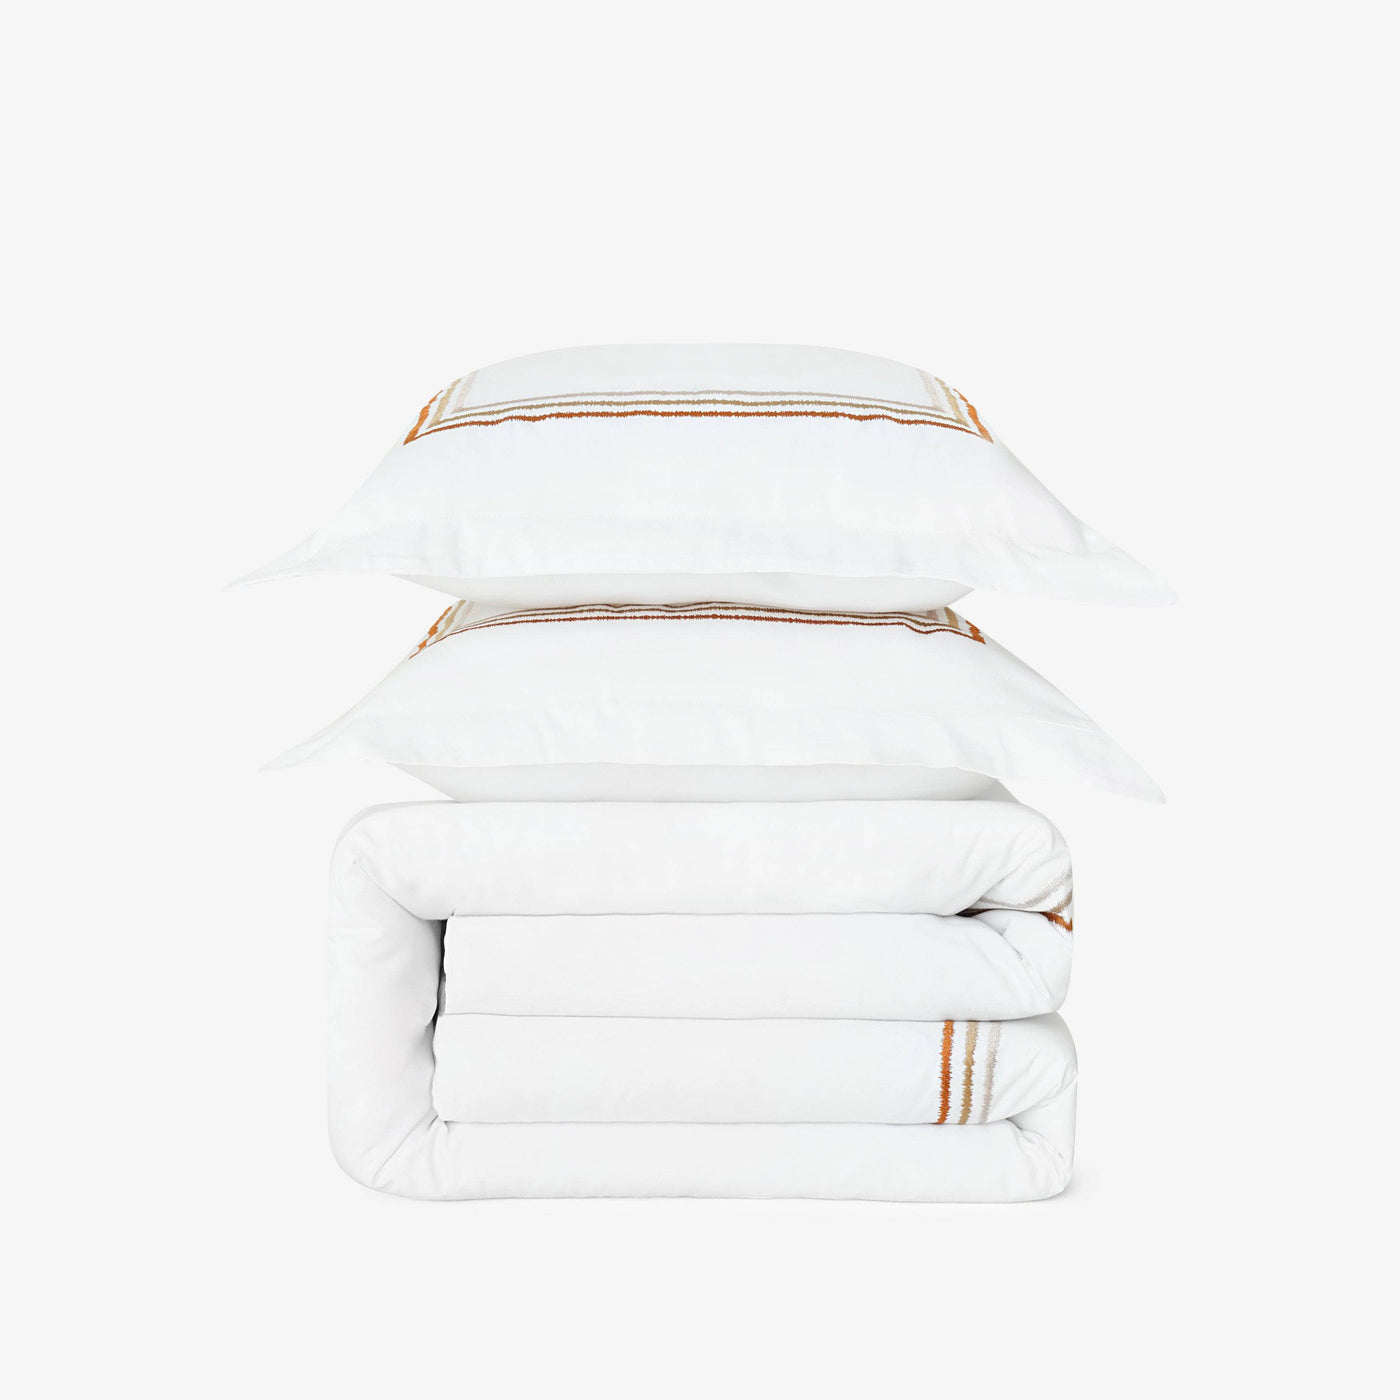 Darcy Embroidered 100% Turkish Cotton 210 TC Duvet Cover Set, White - Mustard, Double Size Bedding Sets sazy.com